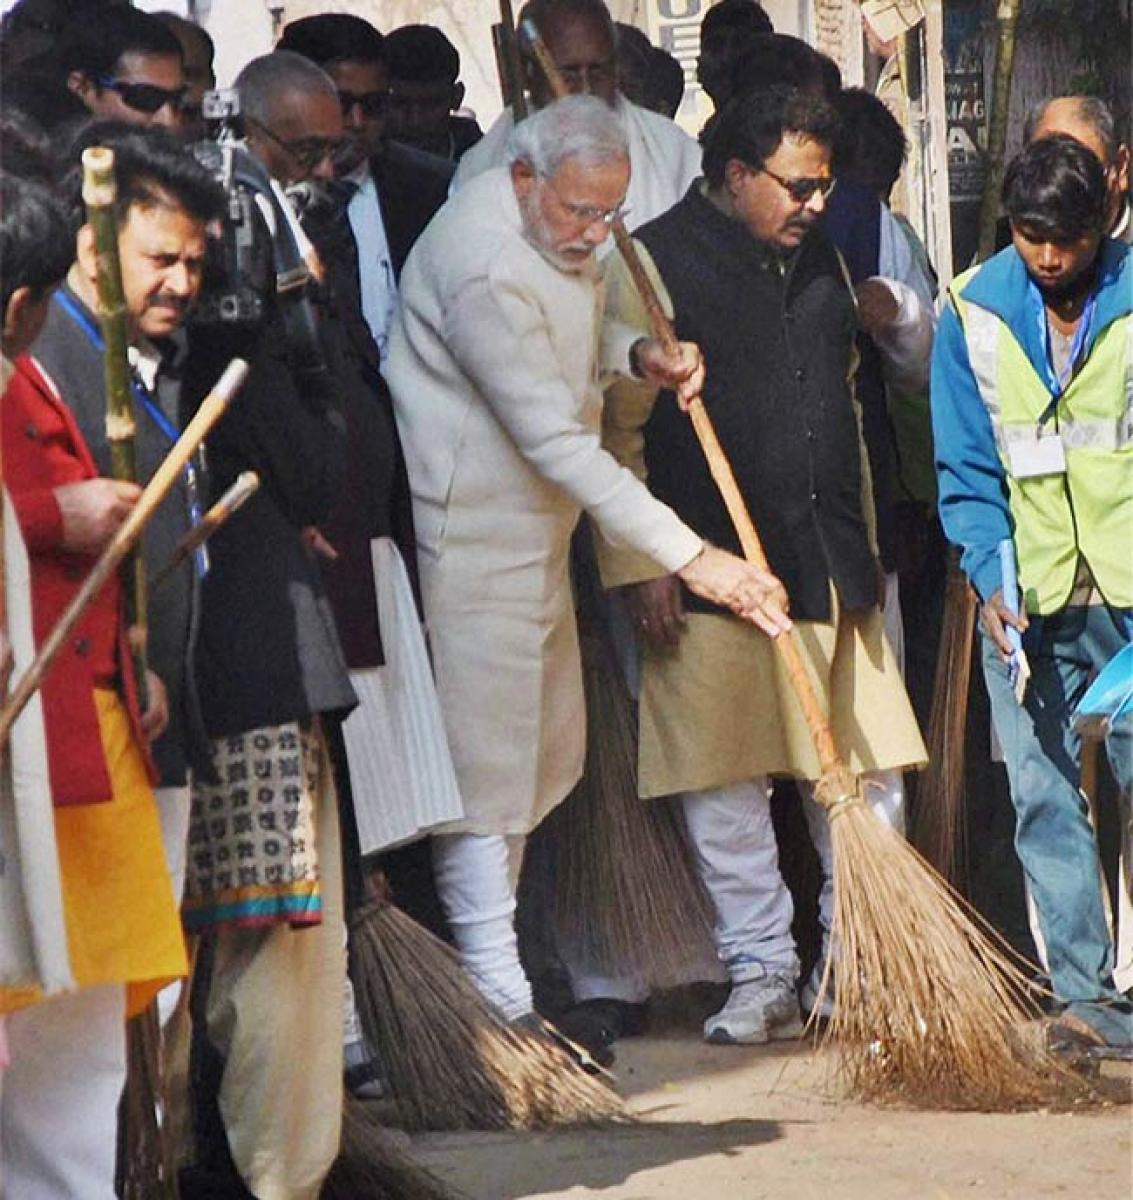 This City has Topped Swachh Bharat Rankings as Indias Cleanest